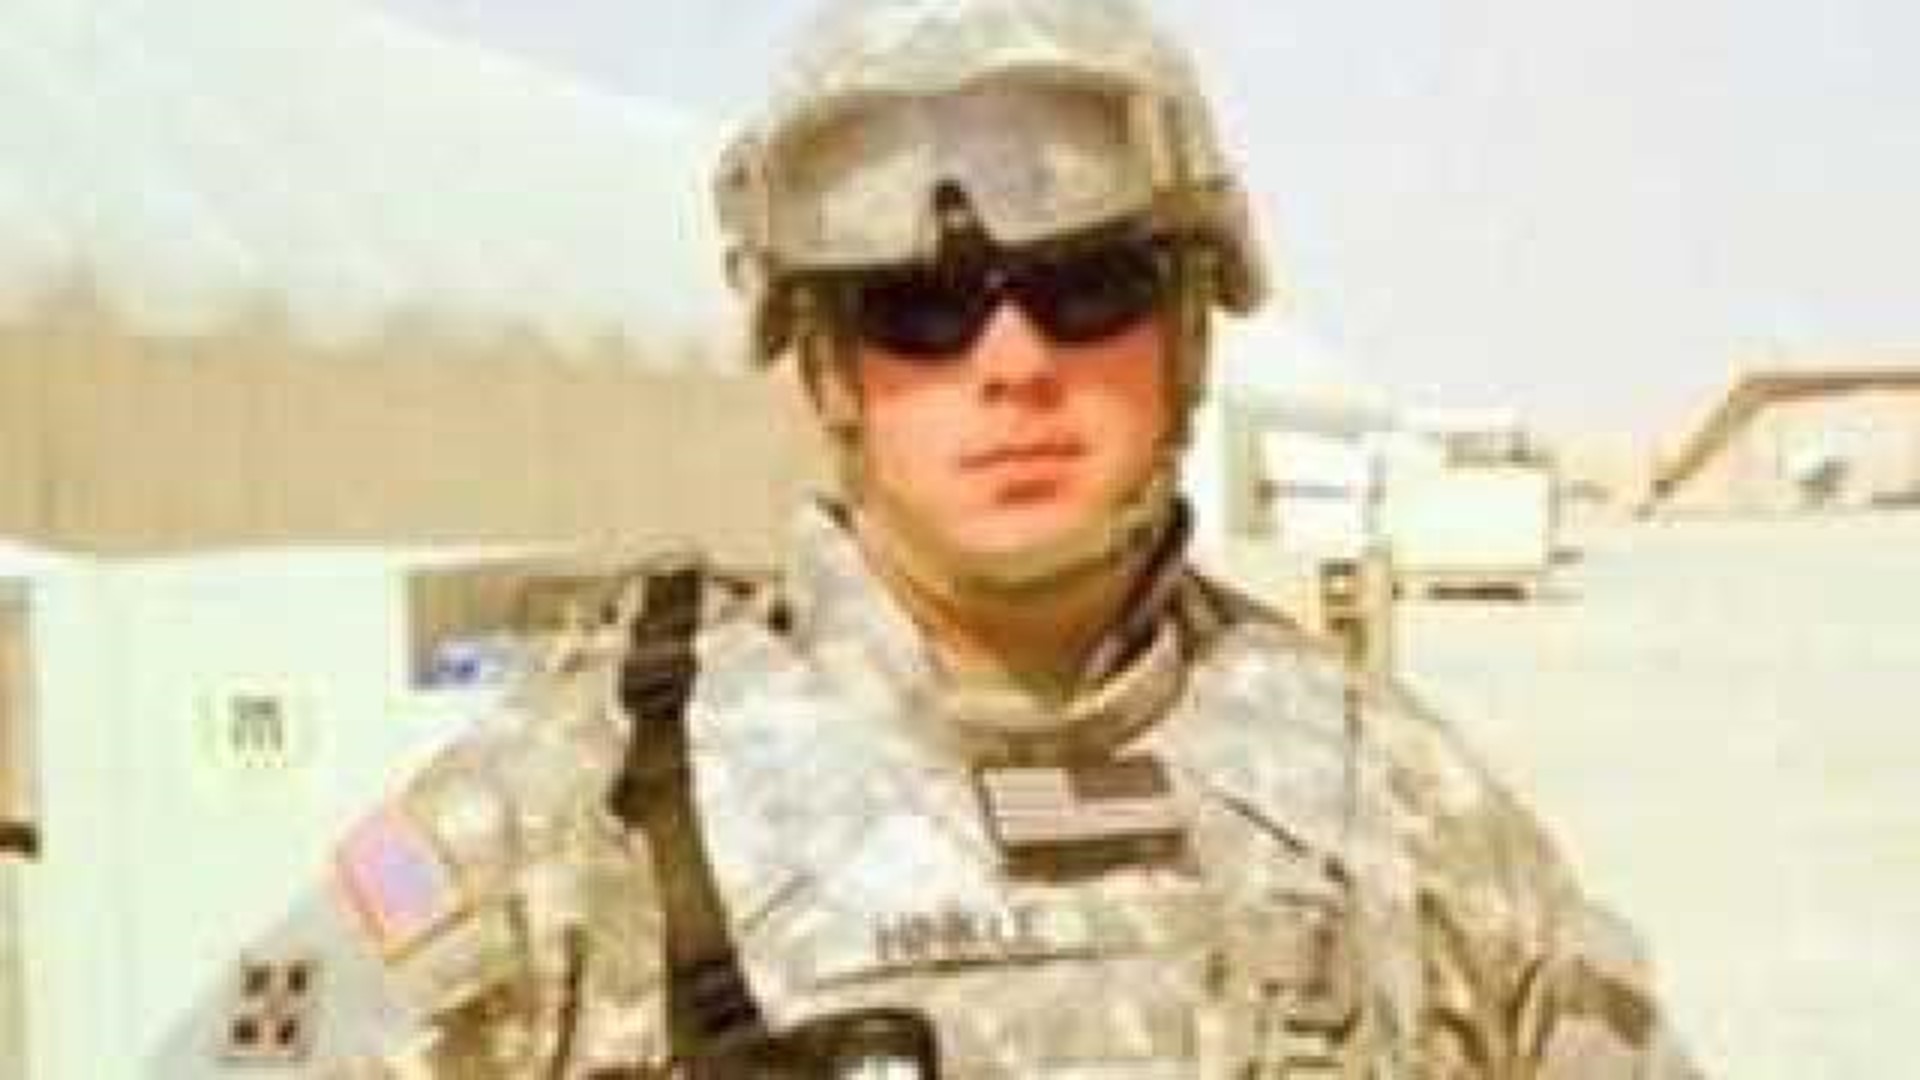 Guardsman fired from civilian job while at training